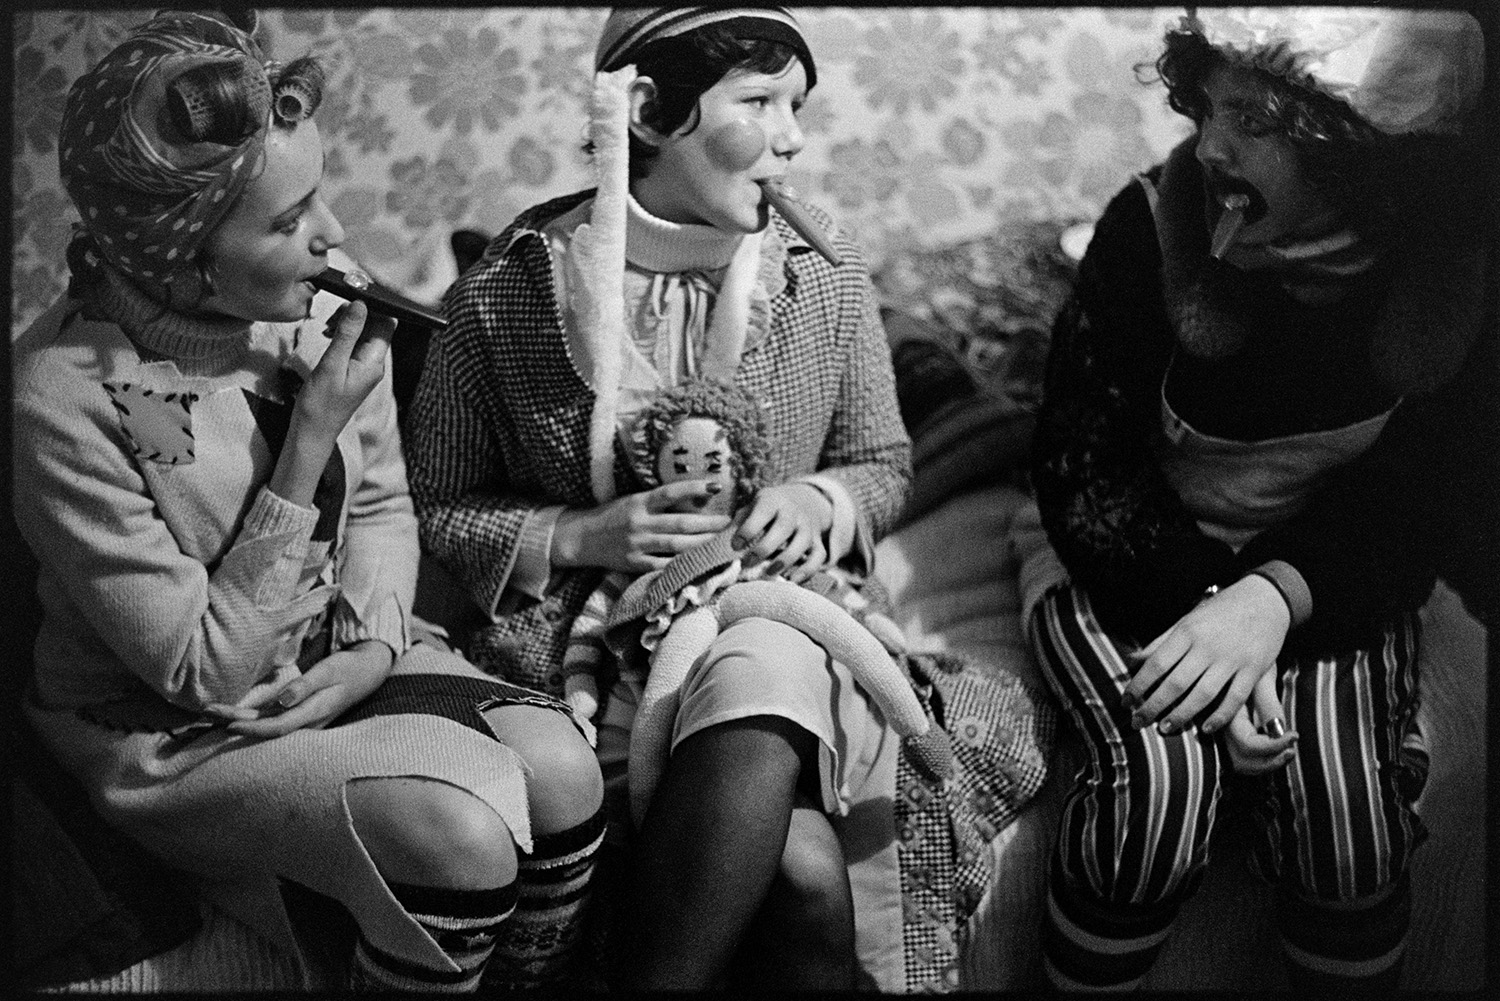 Young people in fancy dress before carnival. 
[Three young women in fancy dress before Hatherleigh Carnival. They are playing kazoos and one of them is holding a knitted doll.]